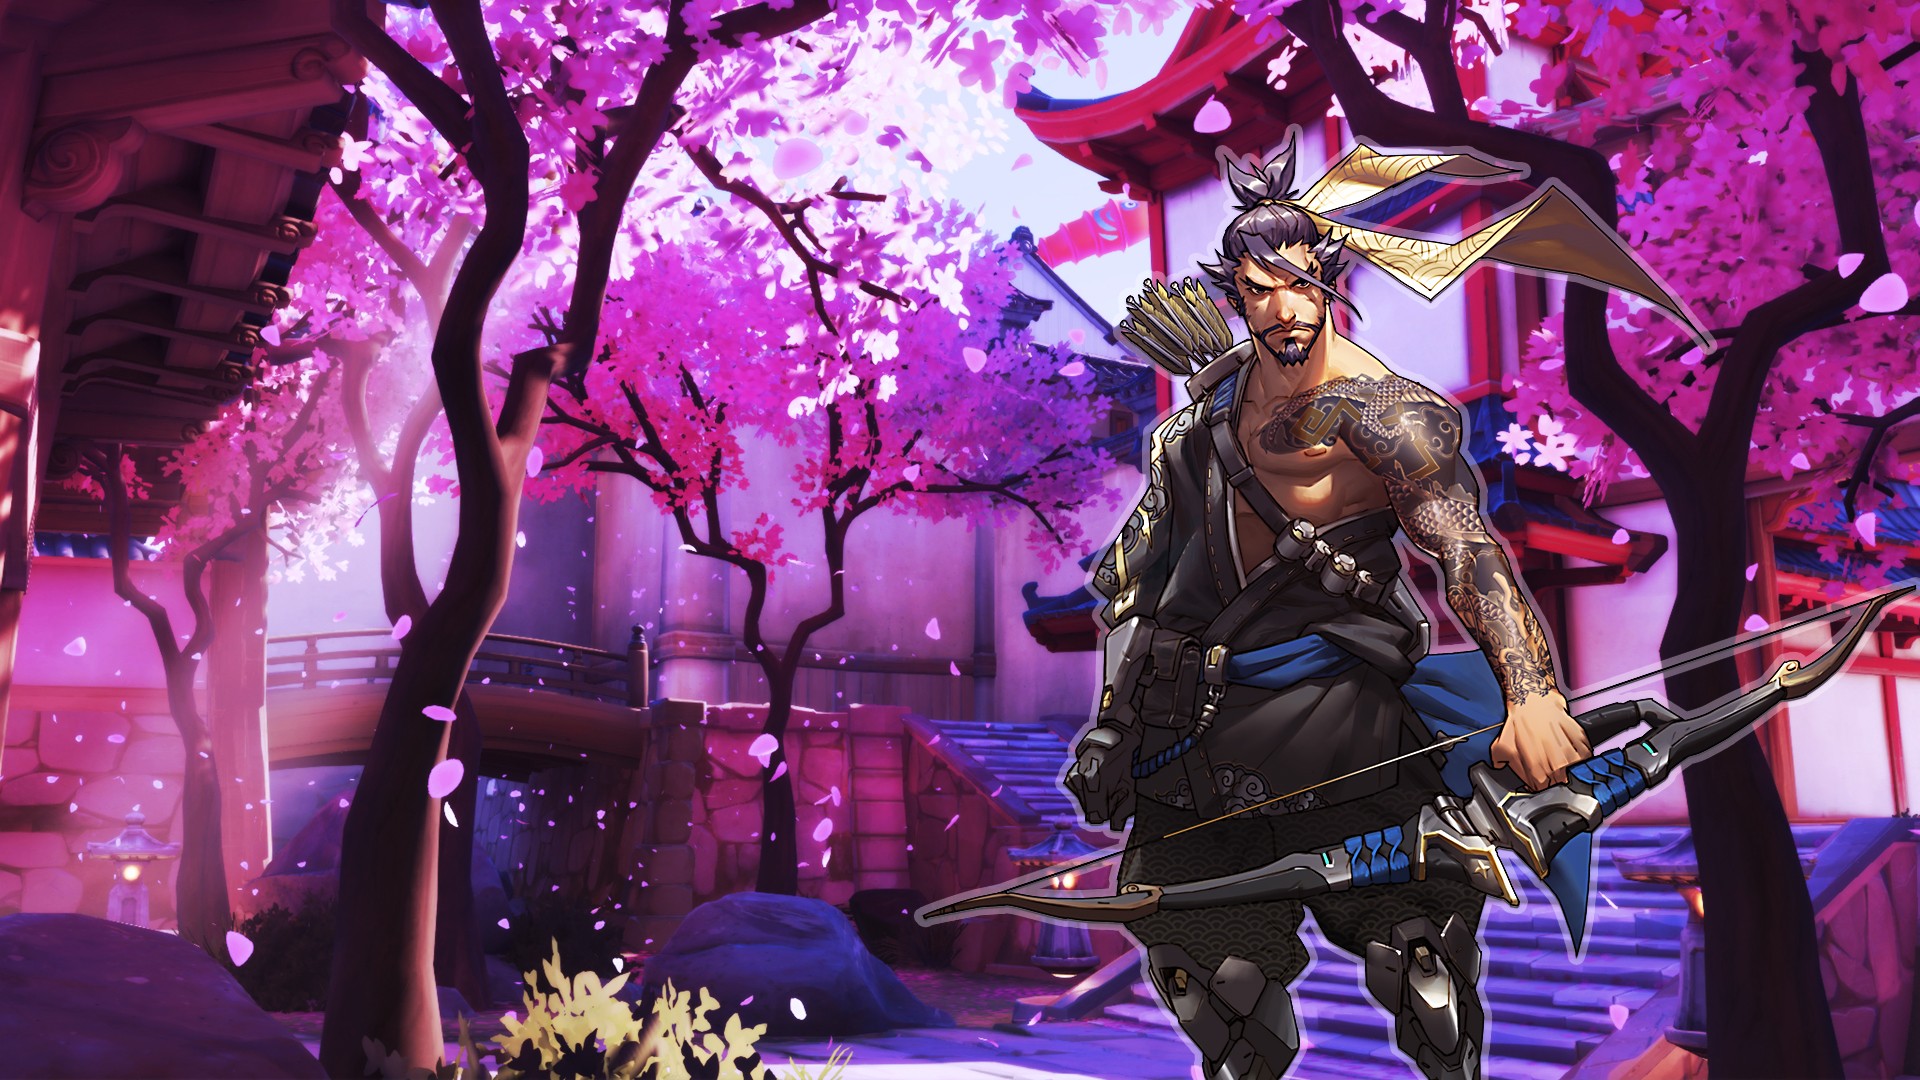 General 1920x1080 Overwatch Blizzard Entertainment livewirehd (Author) Hanzo (Overwatch) PC gaming bow and arrow men inked men digital art